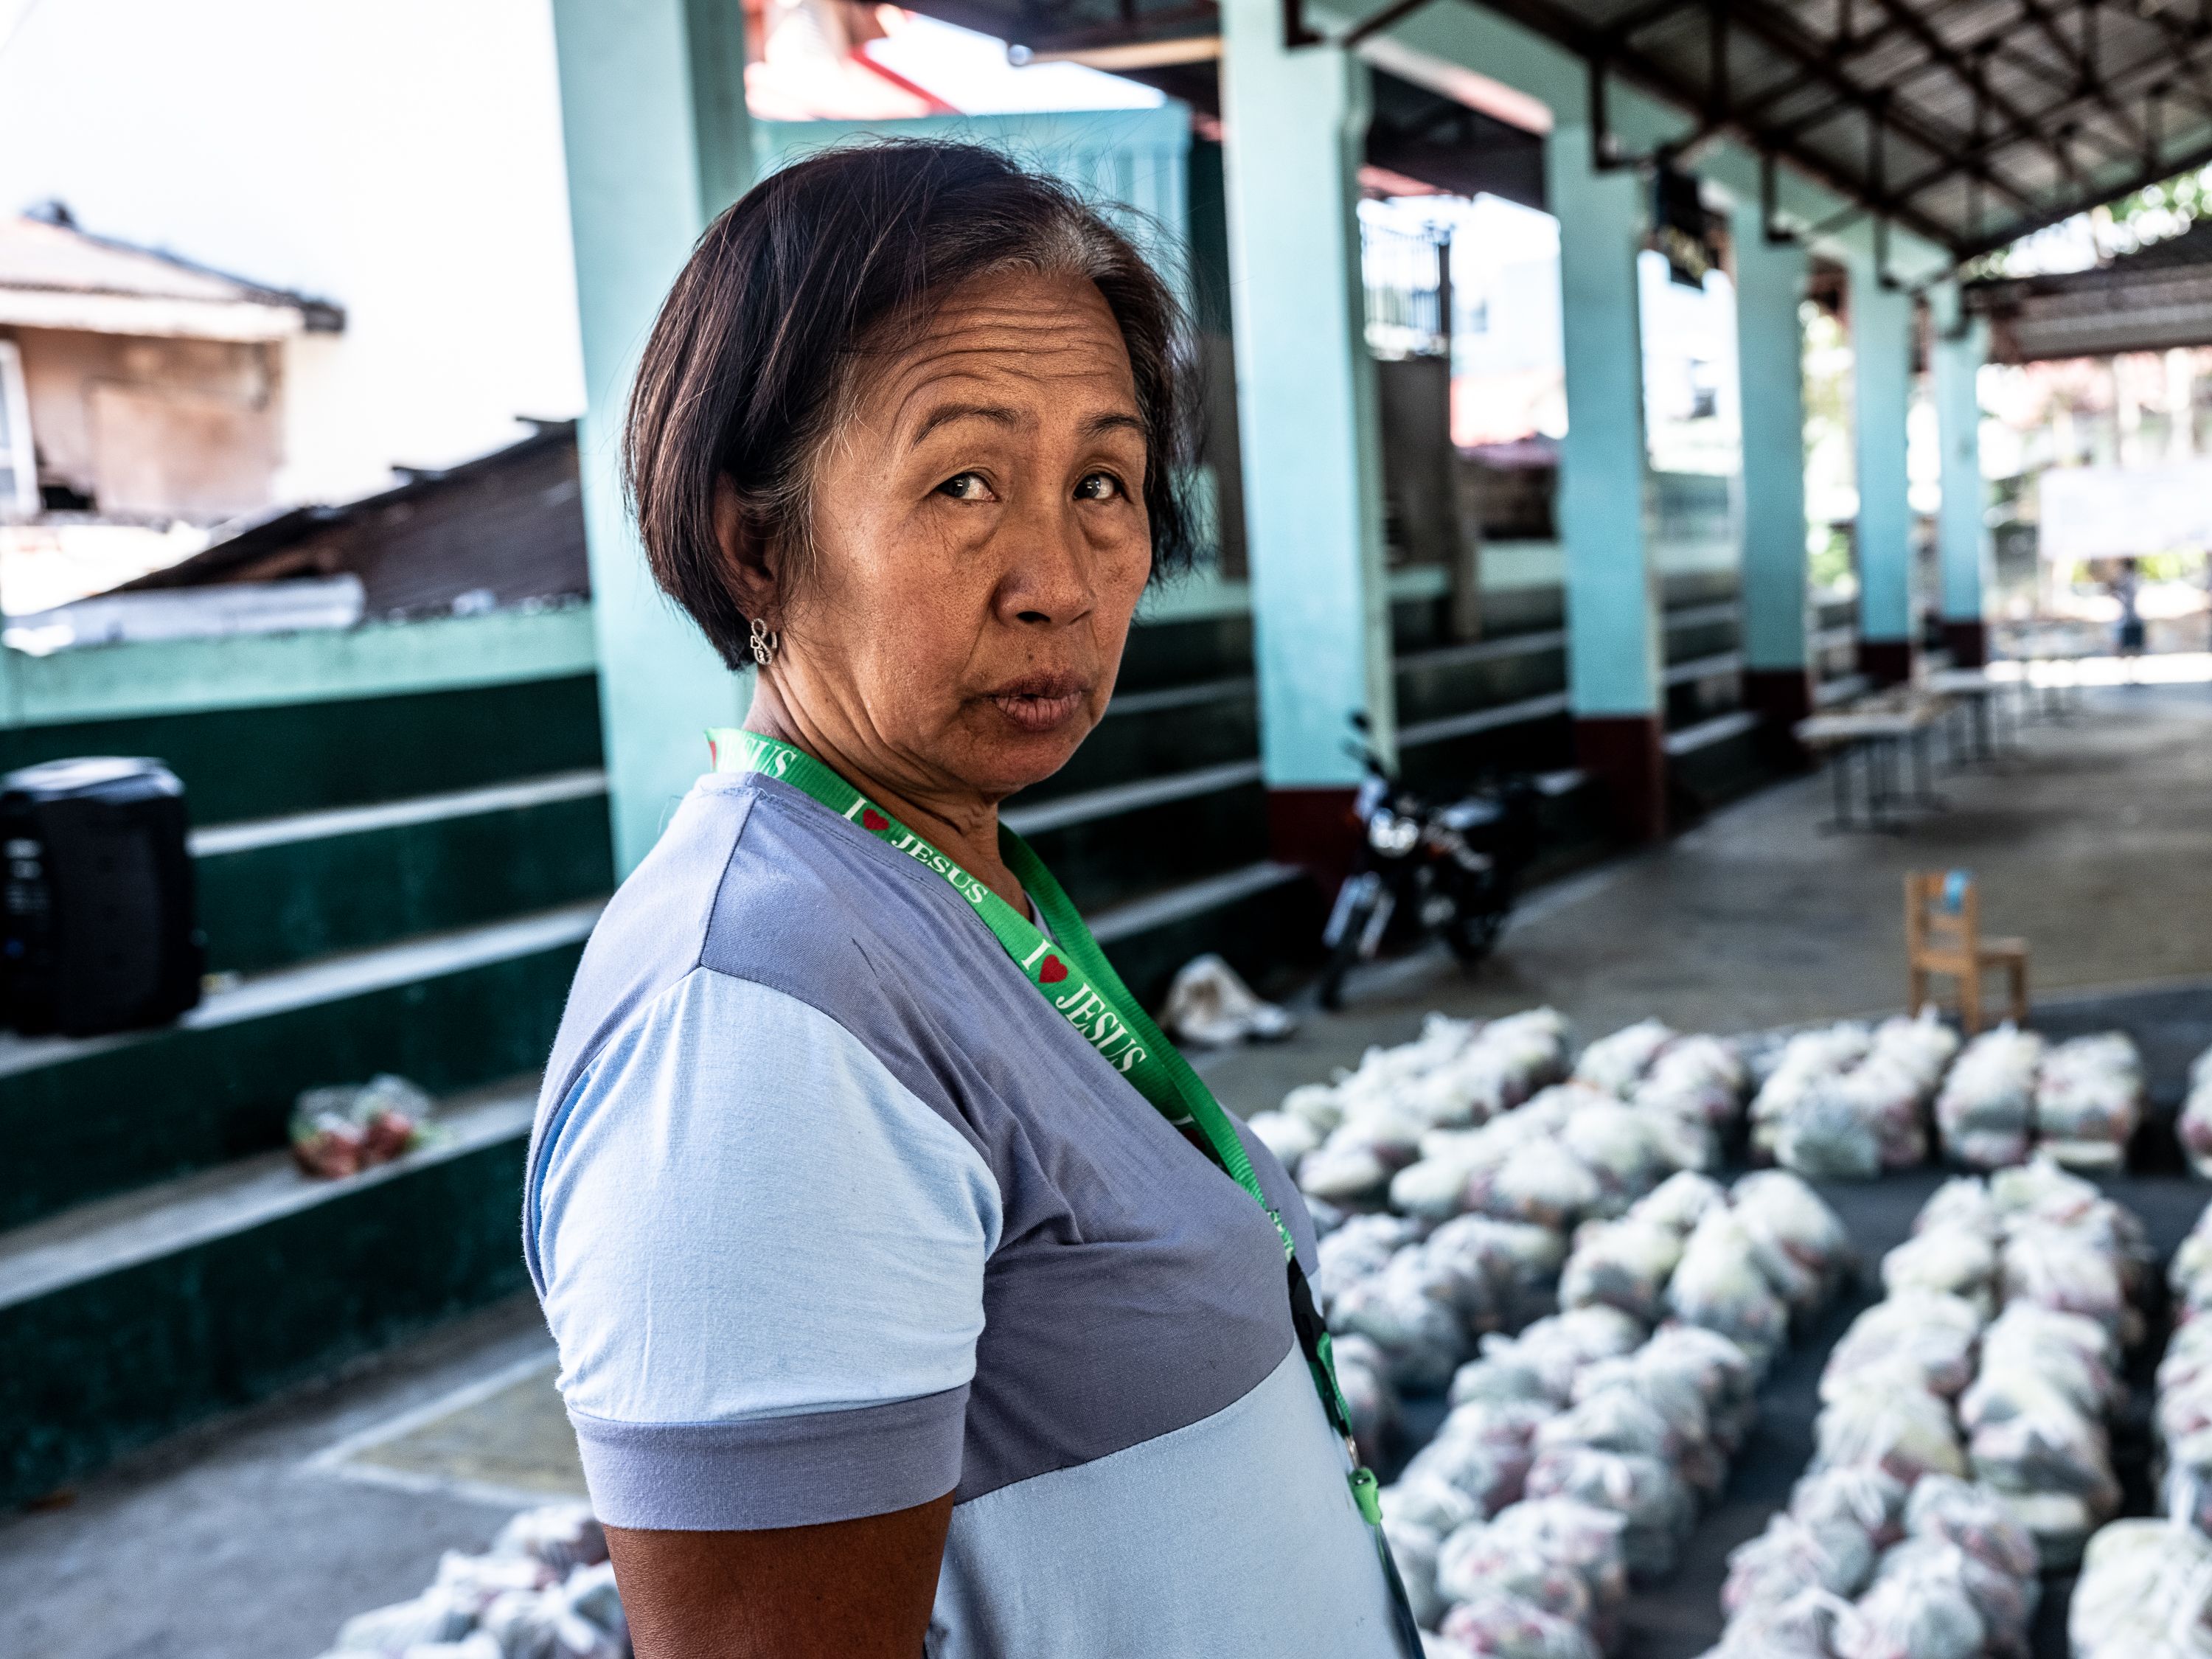 Reggie Renen, a volunteer health worker, rests after packing relief goods for the community. Image by Xyza Bacani. Philippines, 2020.